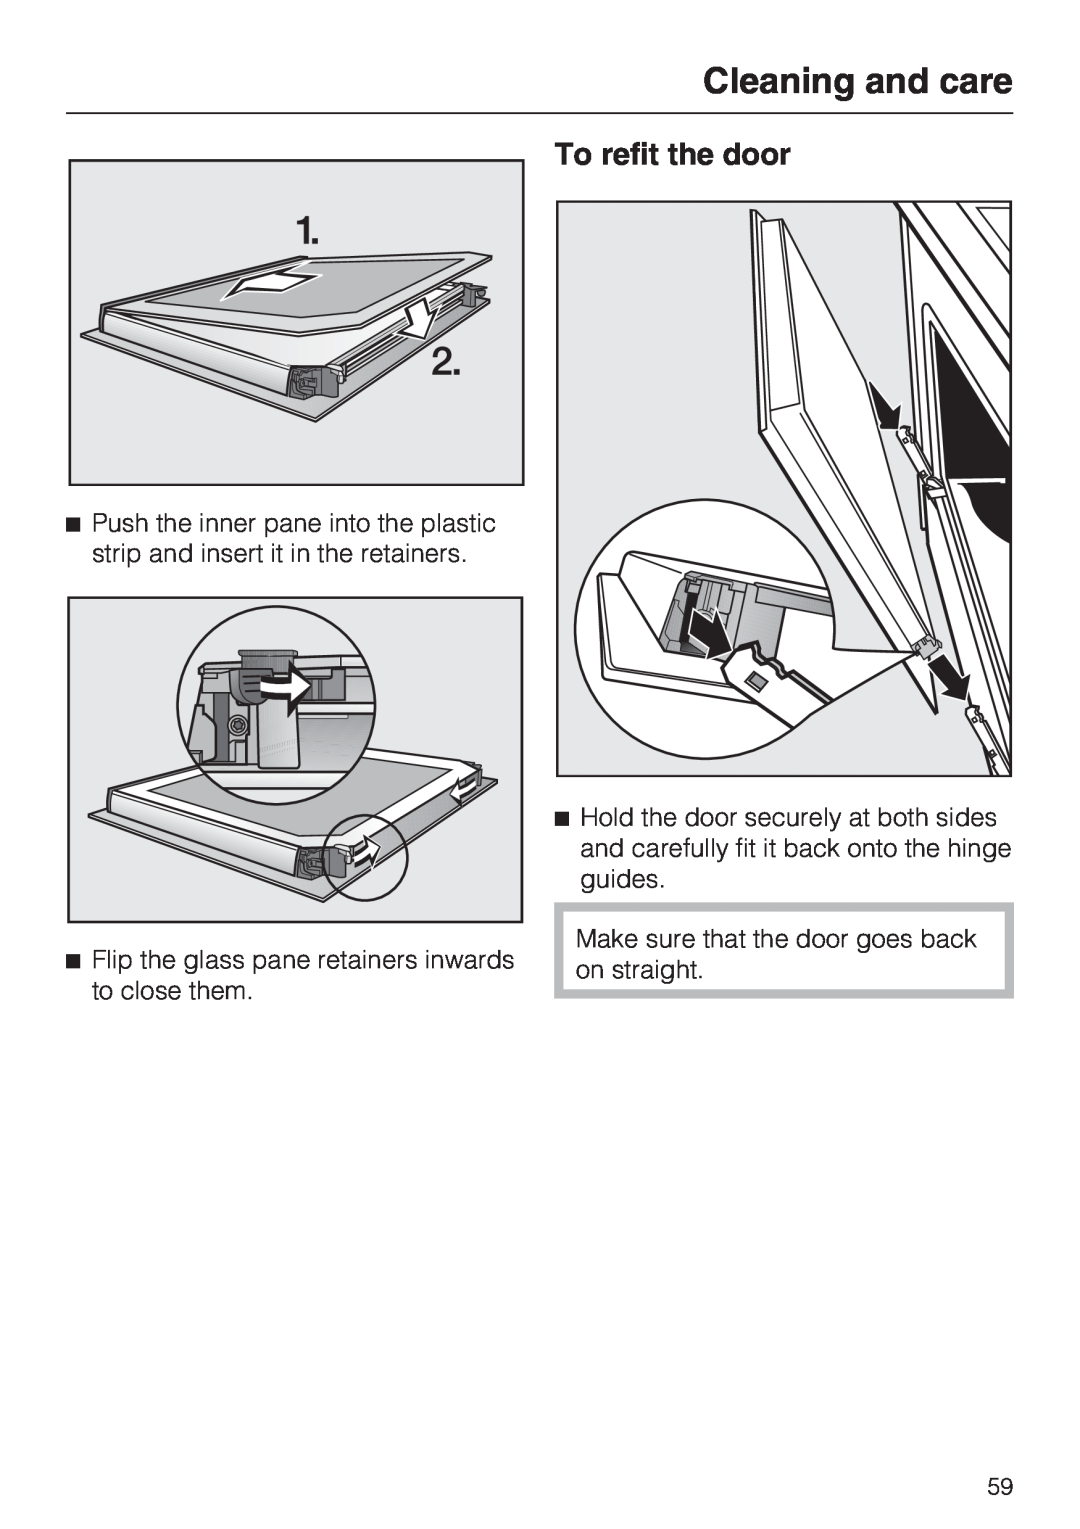 Miele H 5140 BP, H 5240 BP To refit the door, Cleaning and care, Flip the glass pane retainers inwards to close them 